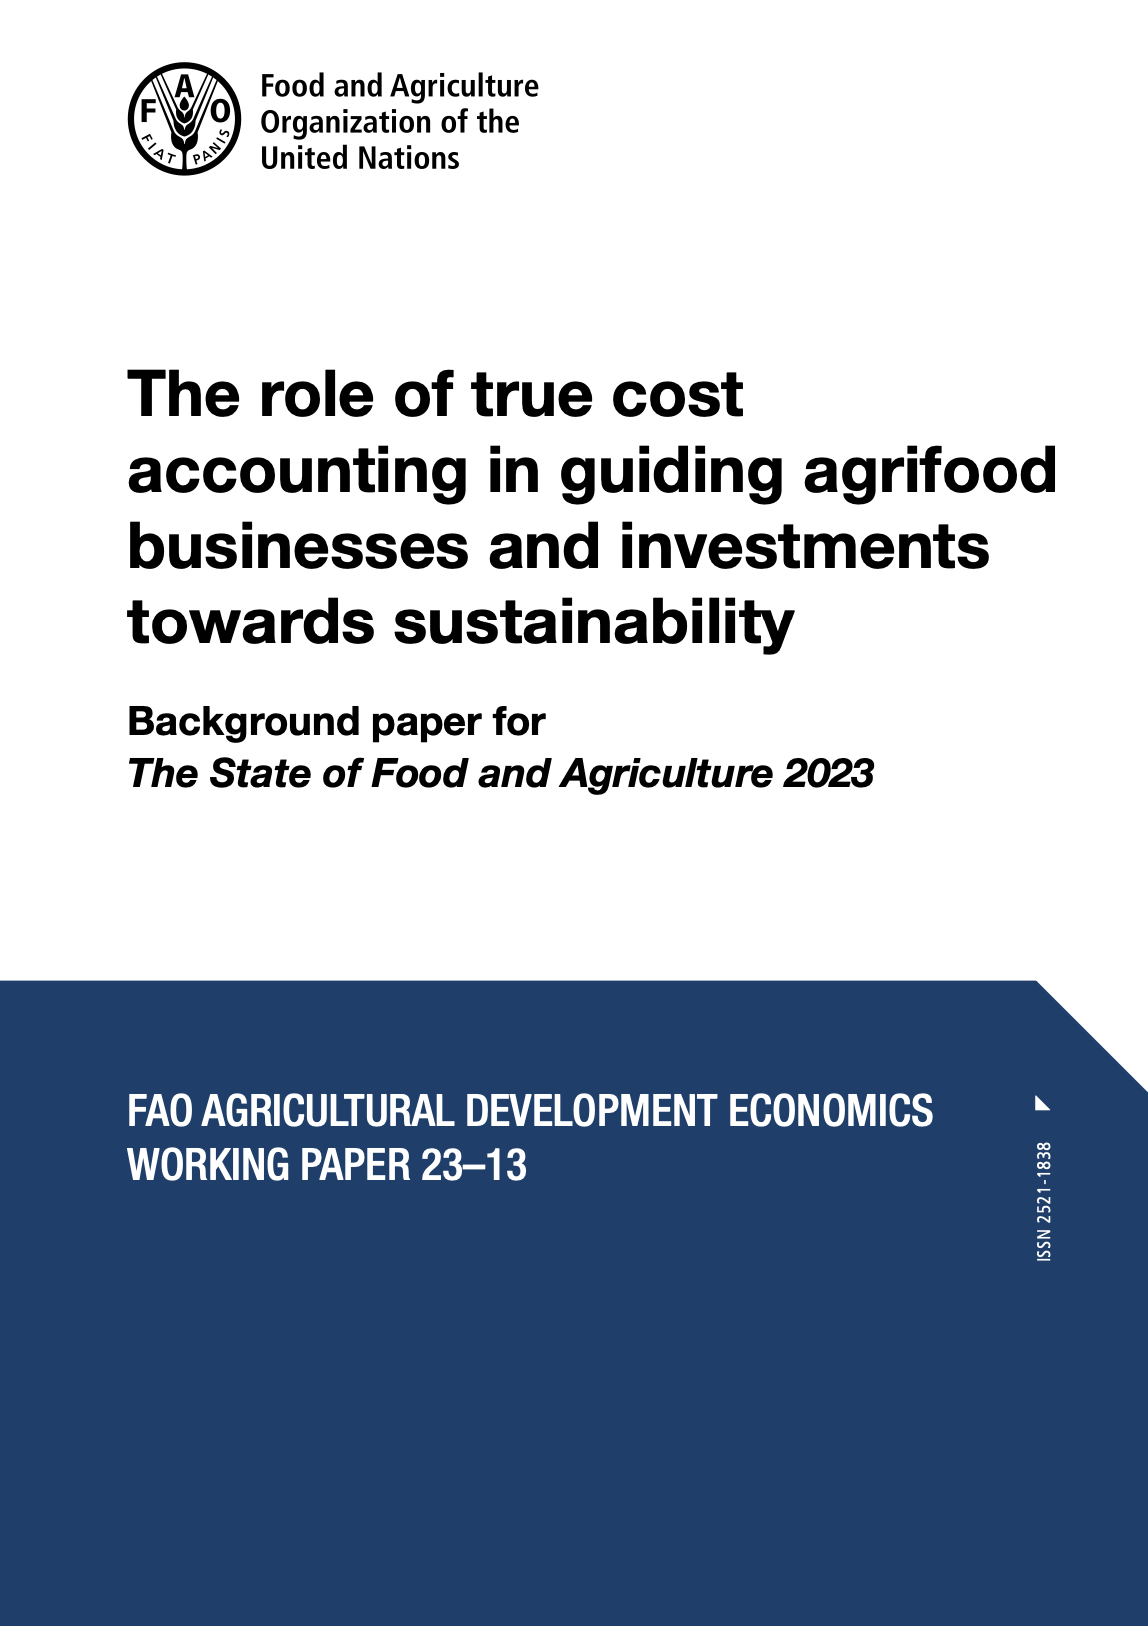 The role of true cost accounting in guiding agrifood businesses and investments towards sustainability